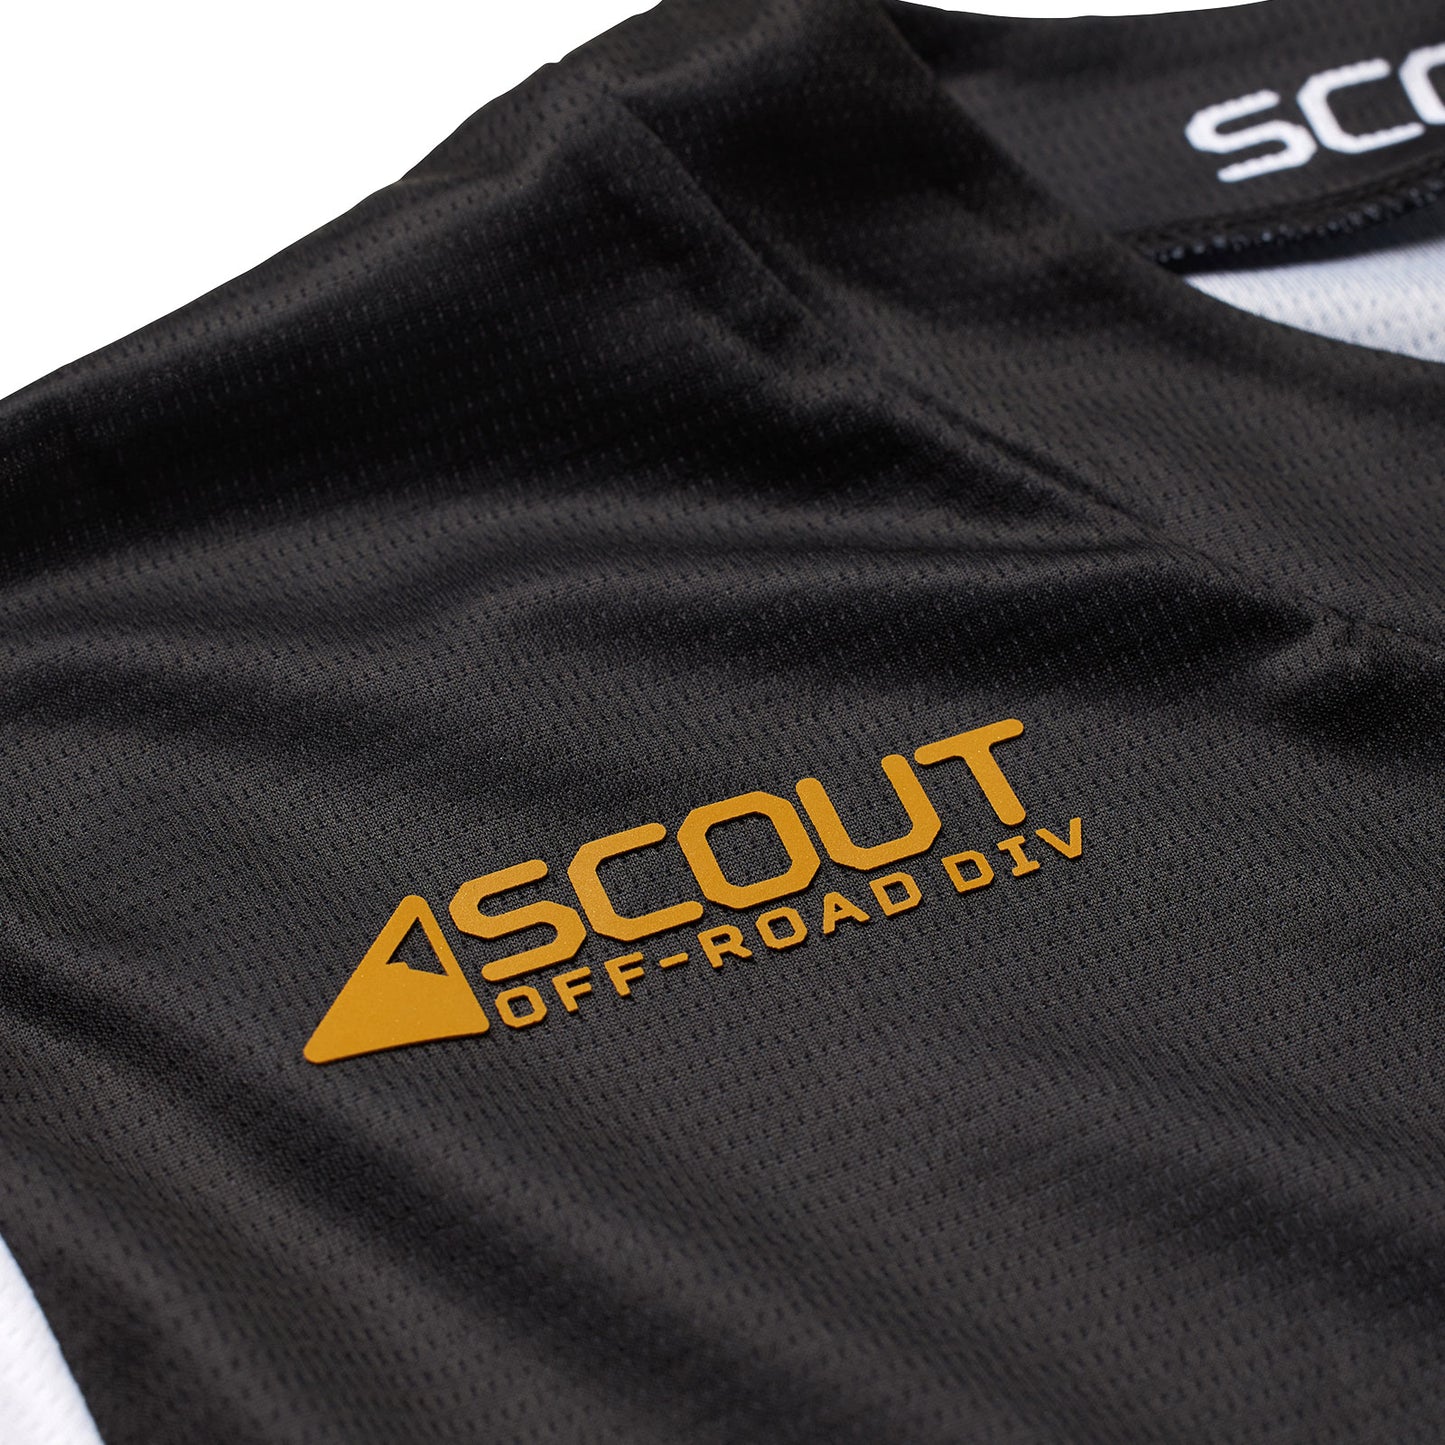 Scout GP Jersey Ride On Black / White